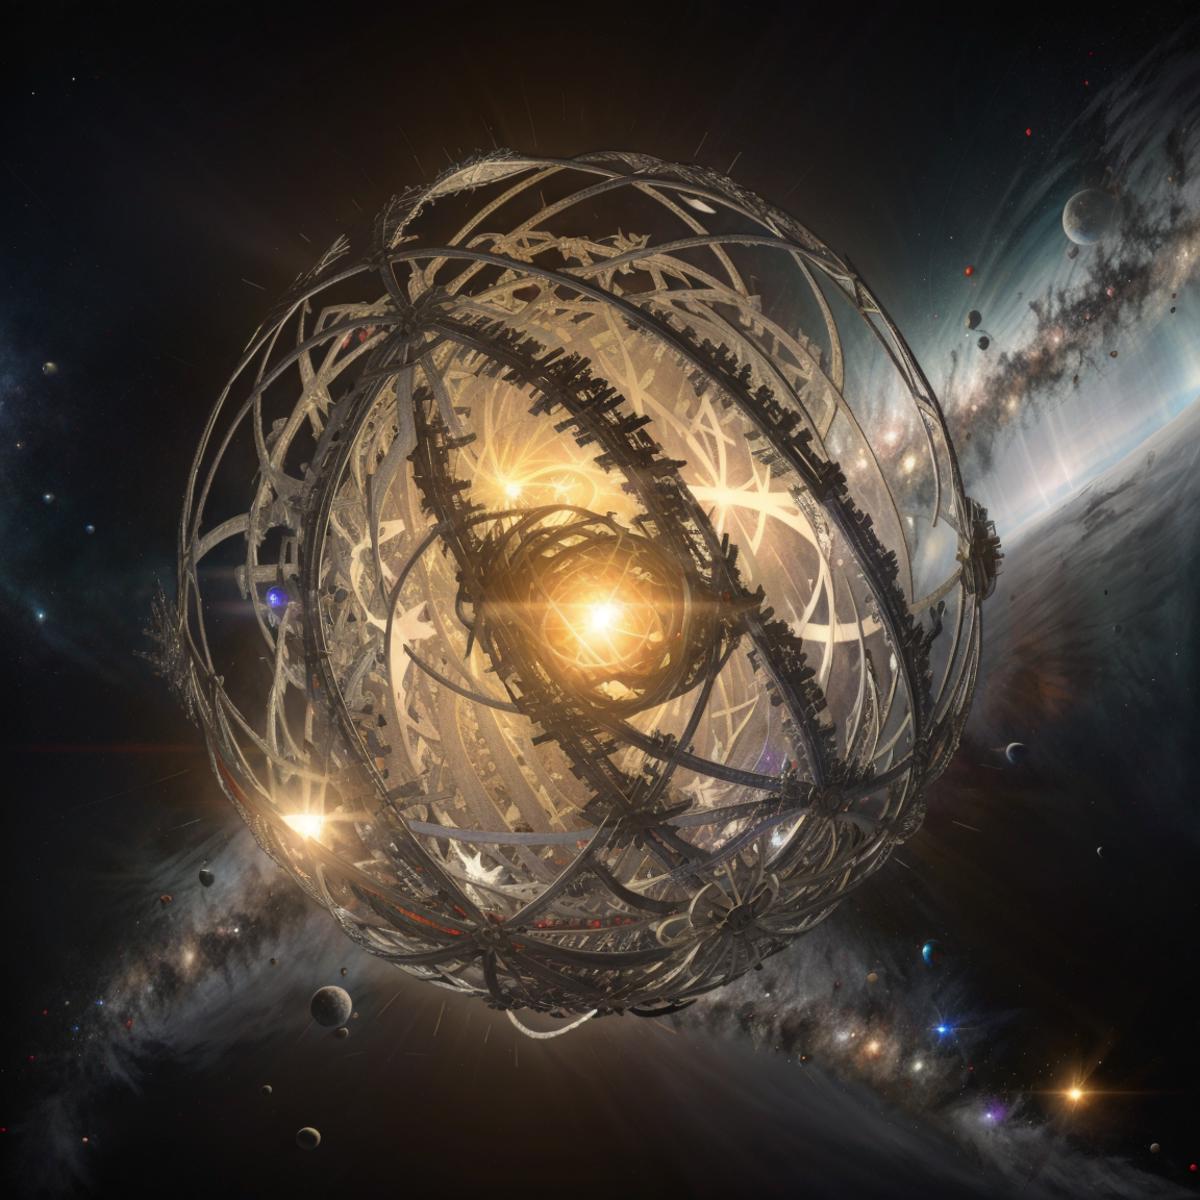 Dyson Sphere image by echo_cipher